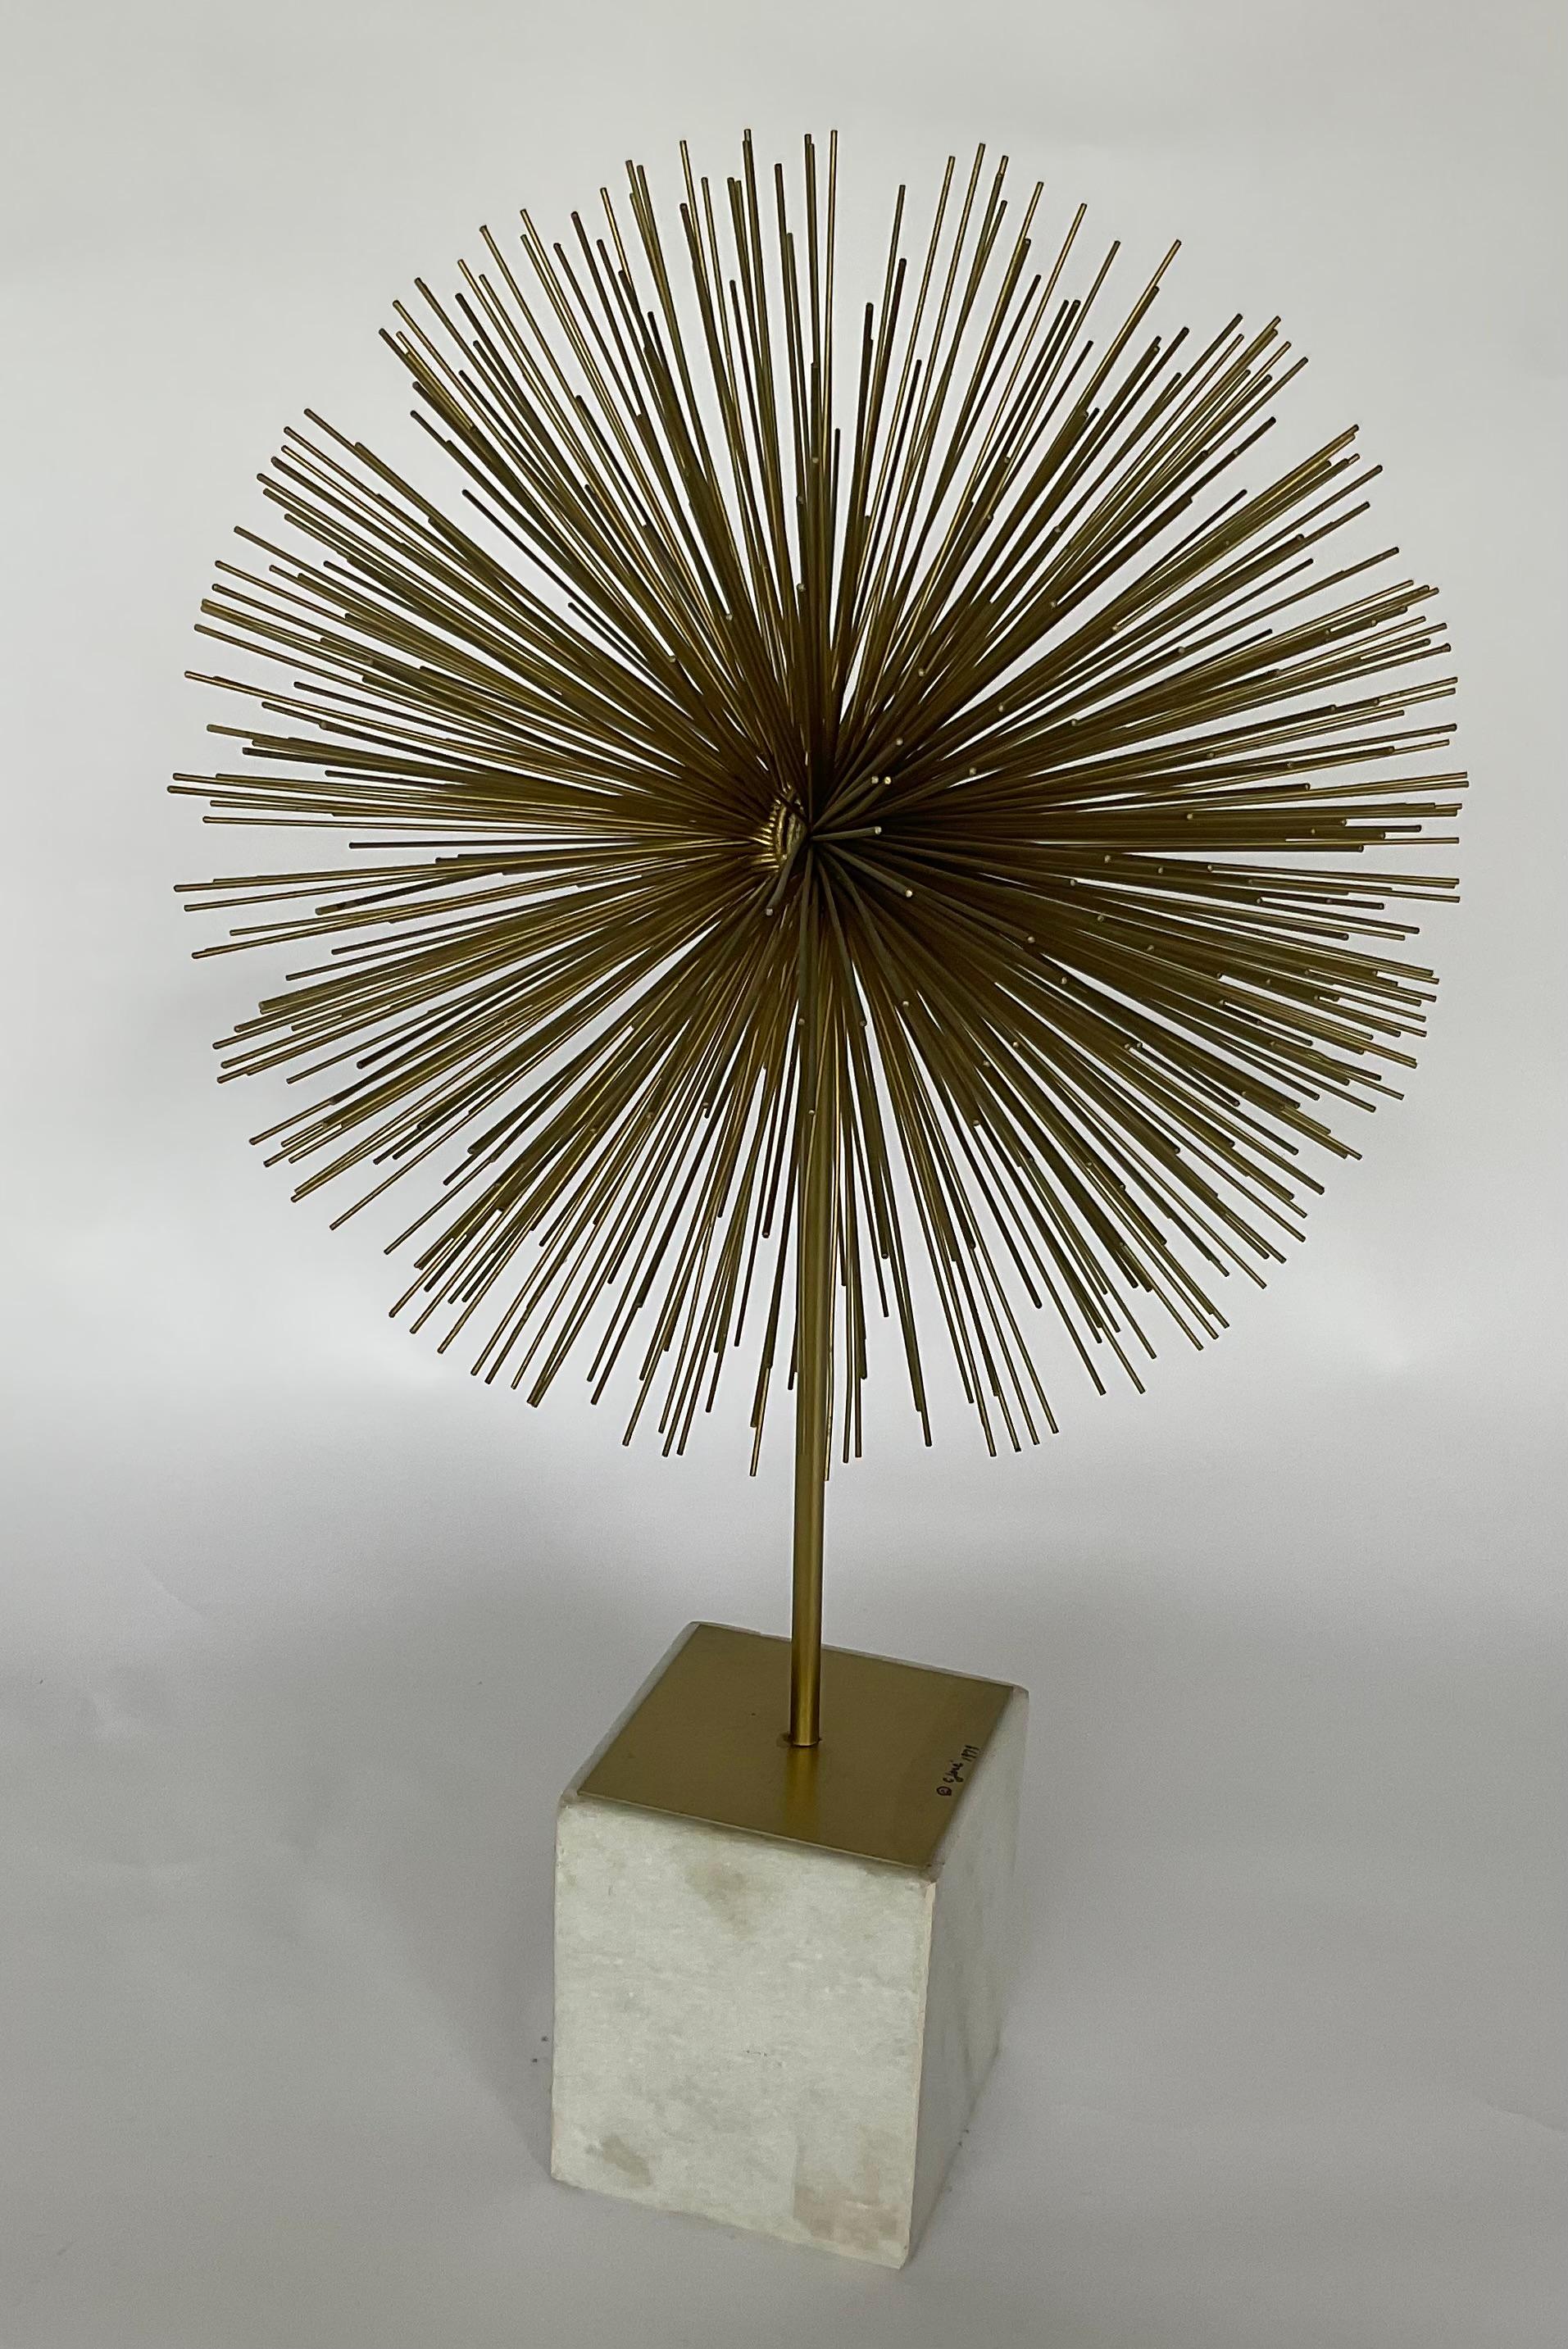 Curtis Jere Pom Pom Firework Sculpture in Brass and Marble signed and dated. 